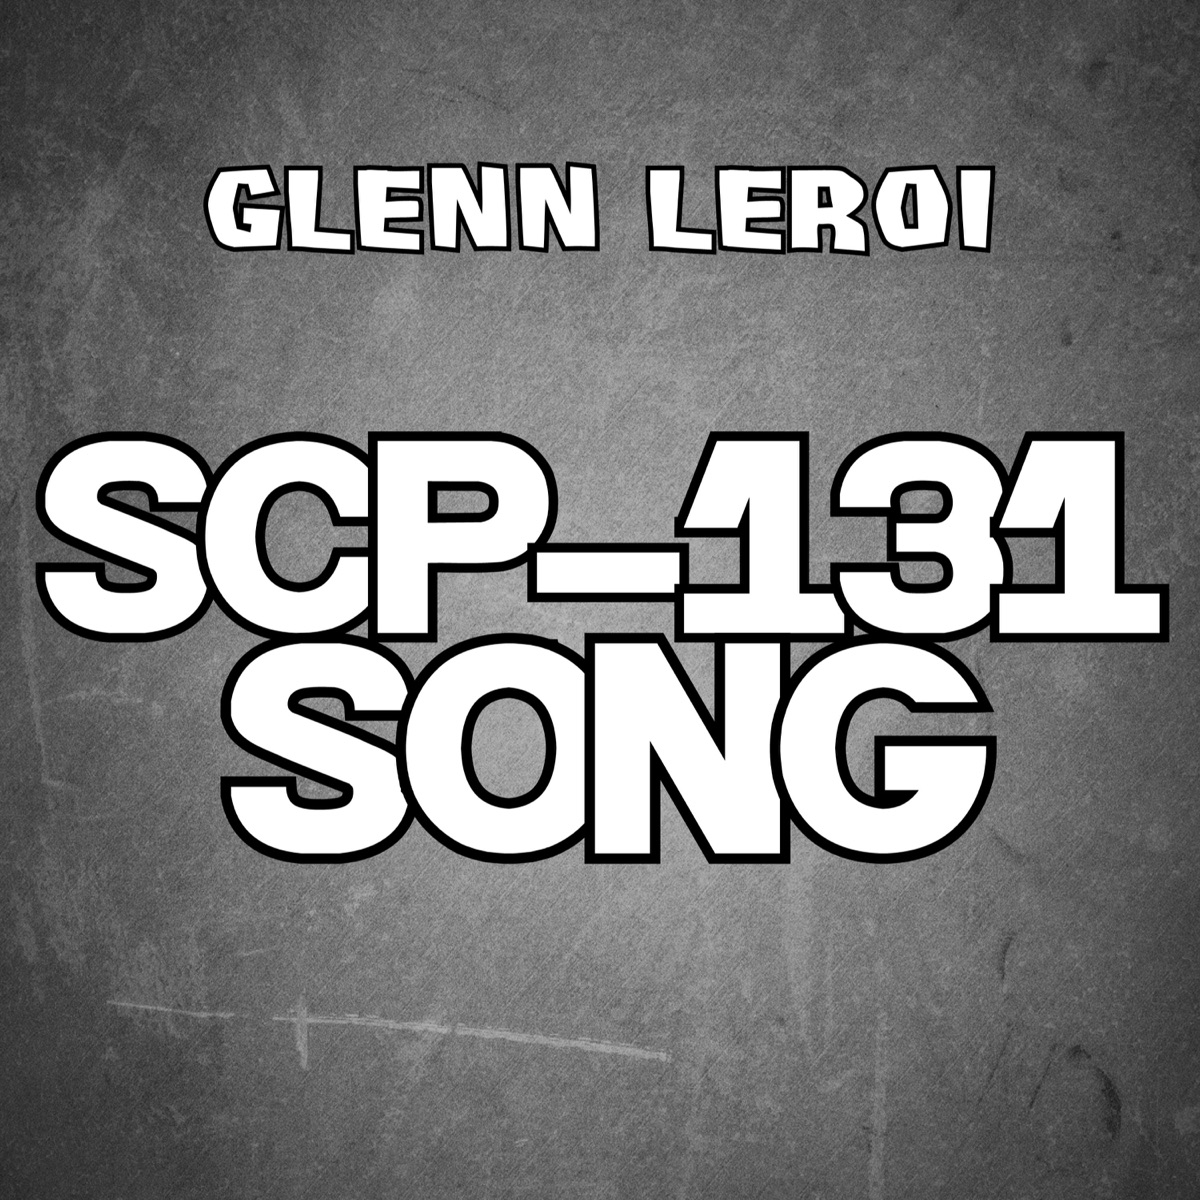 SCP-714 song